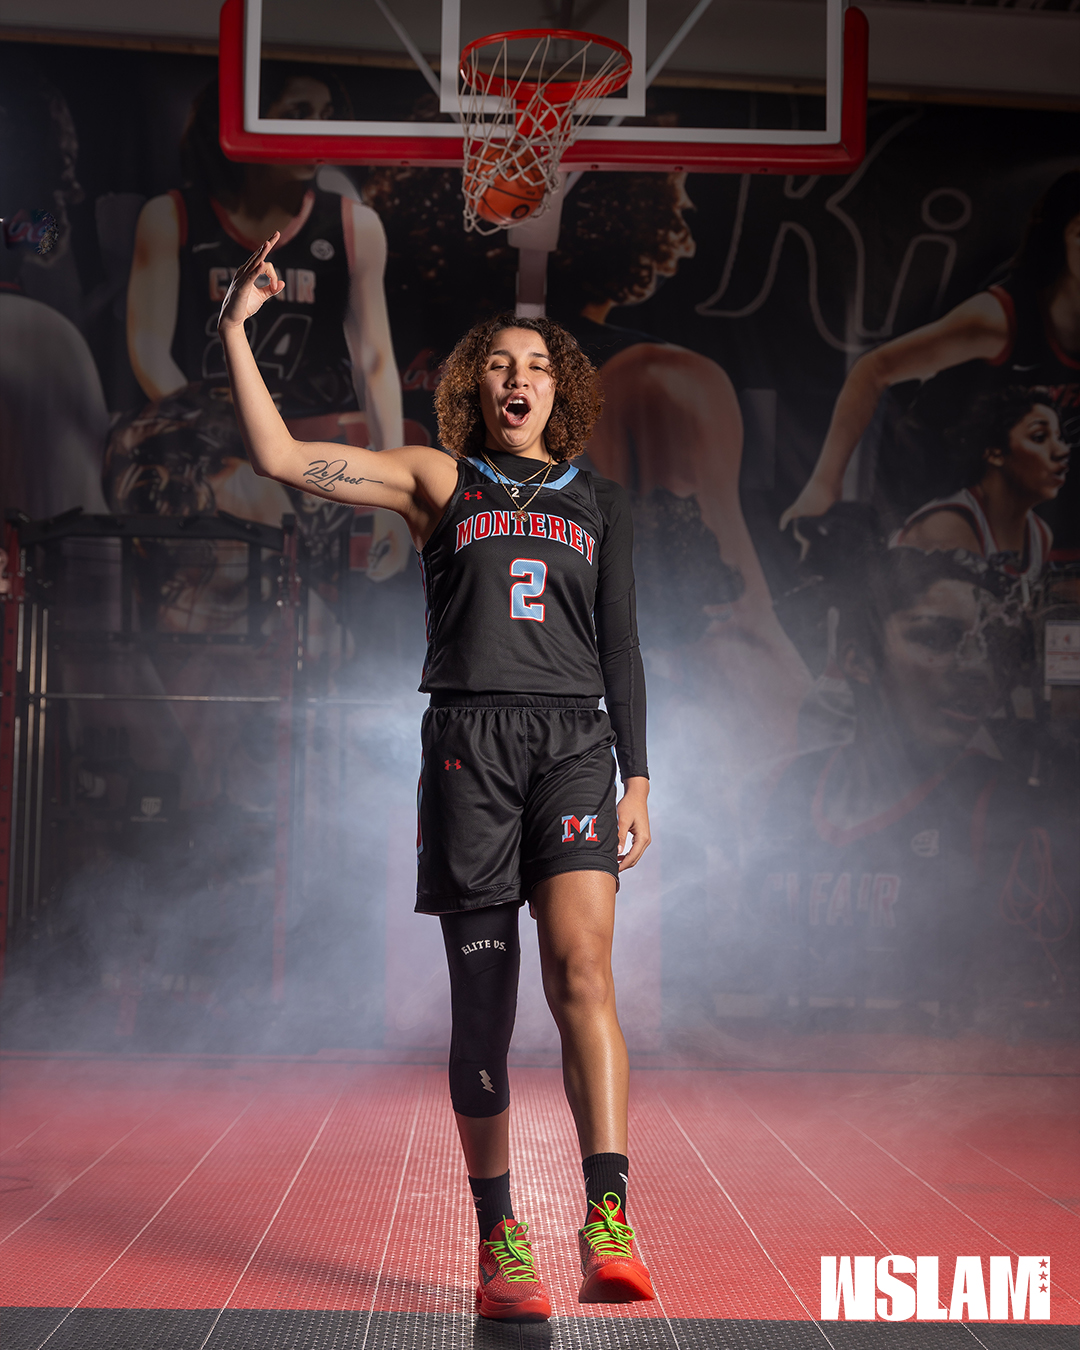 No. 1 Ranked ’25 Monterey Star Aaliyah Chavez is Taking Over Women’s Hoops On Her Own Terms